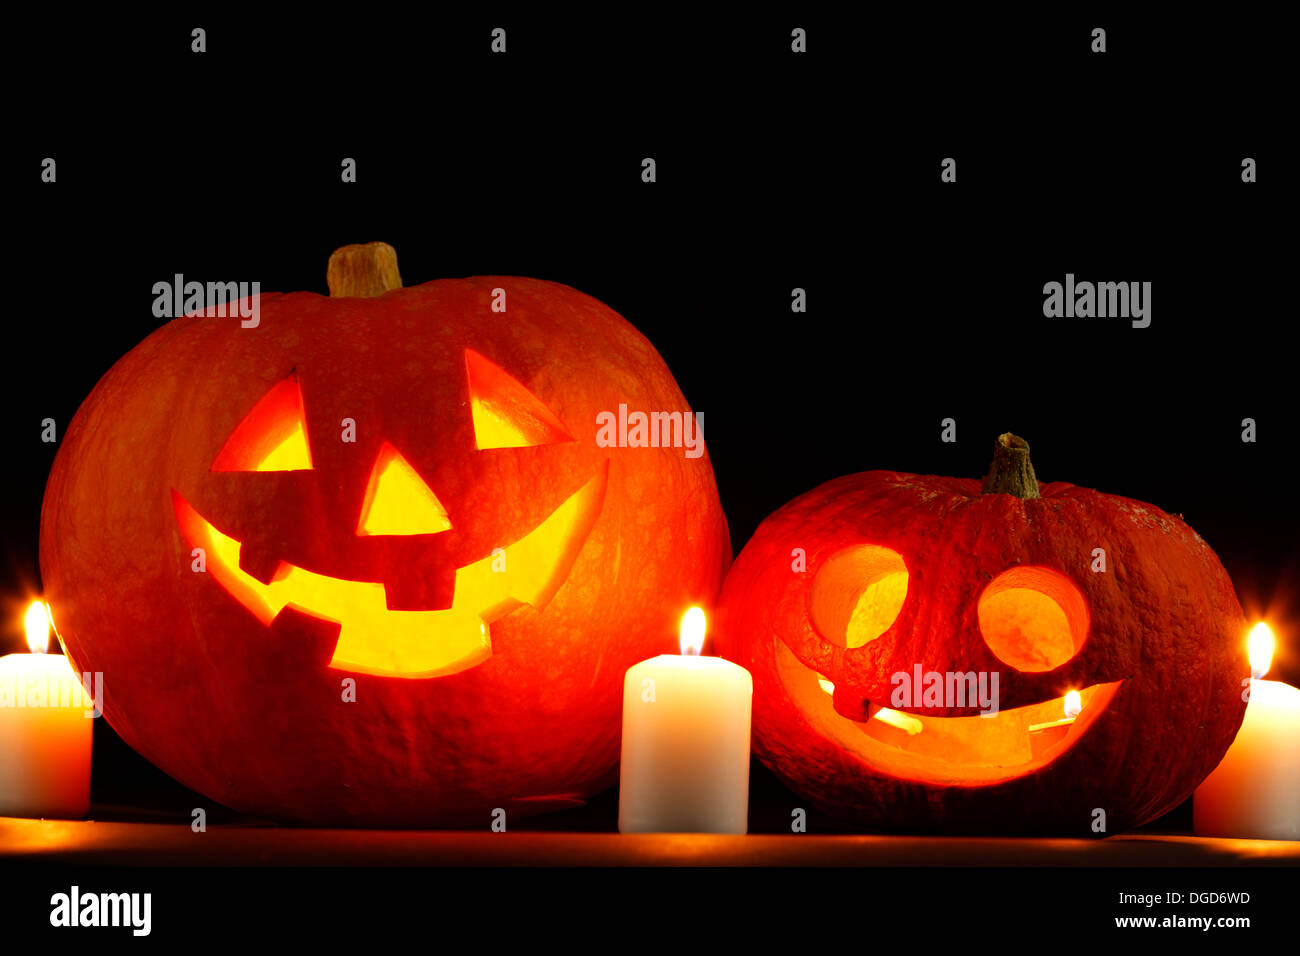 Funny Halloween pumpkins and burning candles Stock Photo